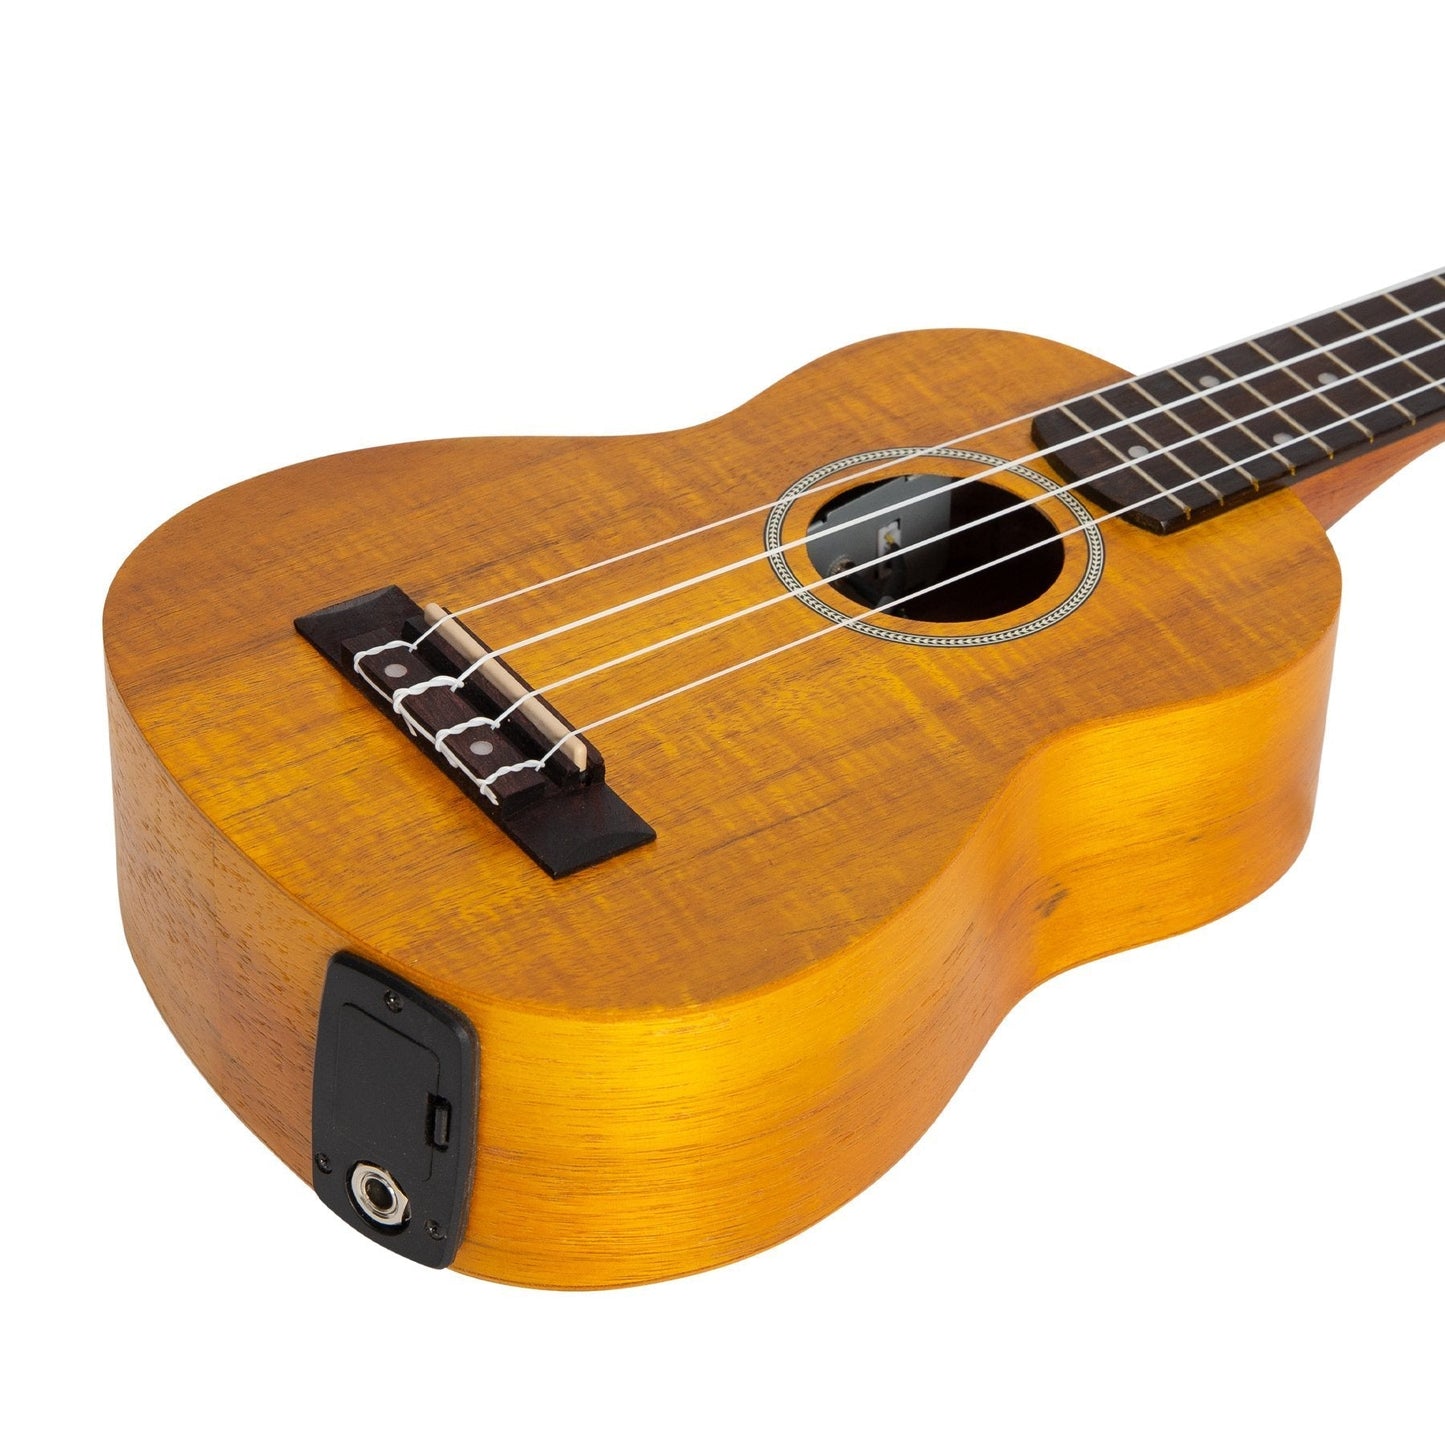 Mojo 'A30 Series' All Acacia Electric Soprano Ukulele with Built-in Tuner (Natural Satin)